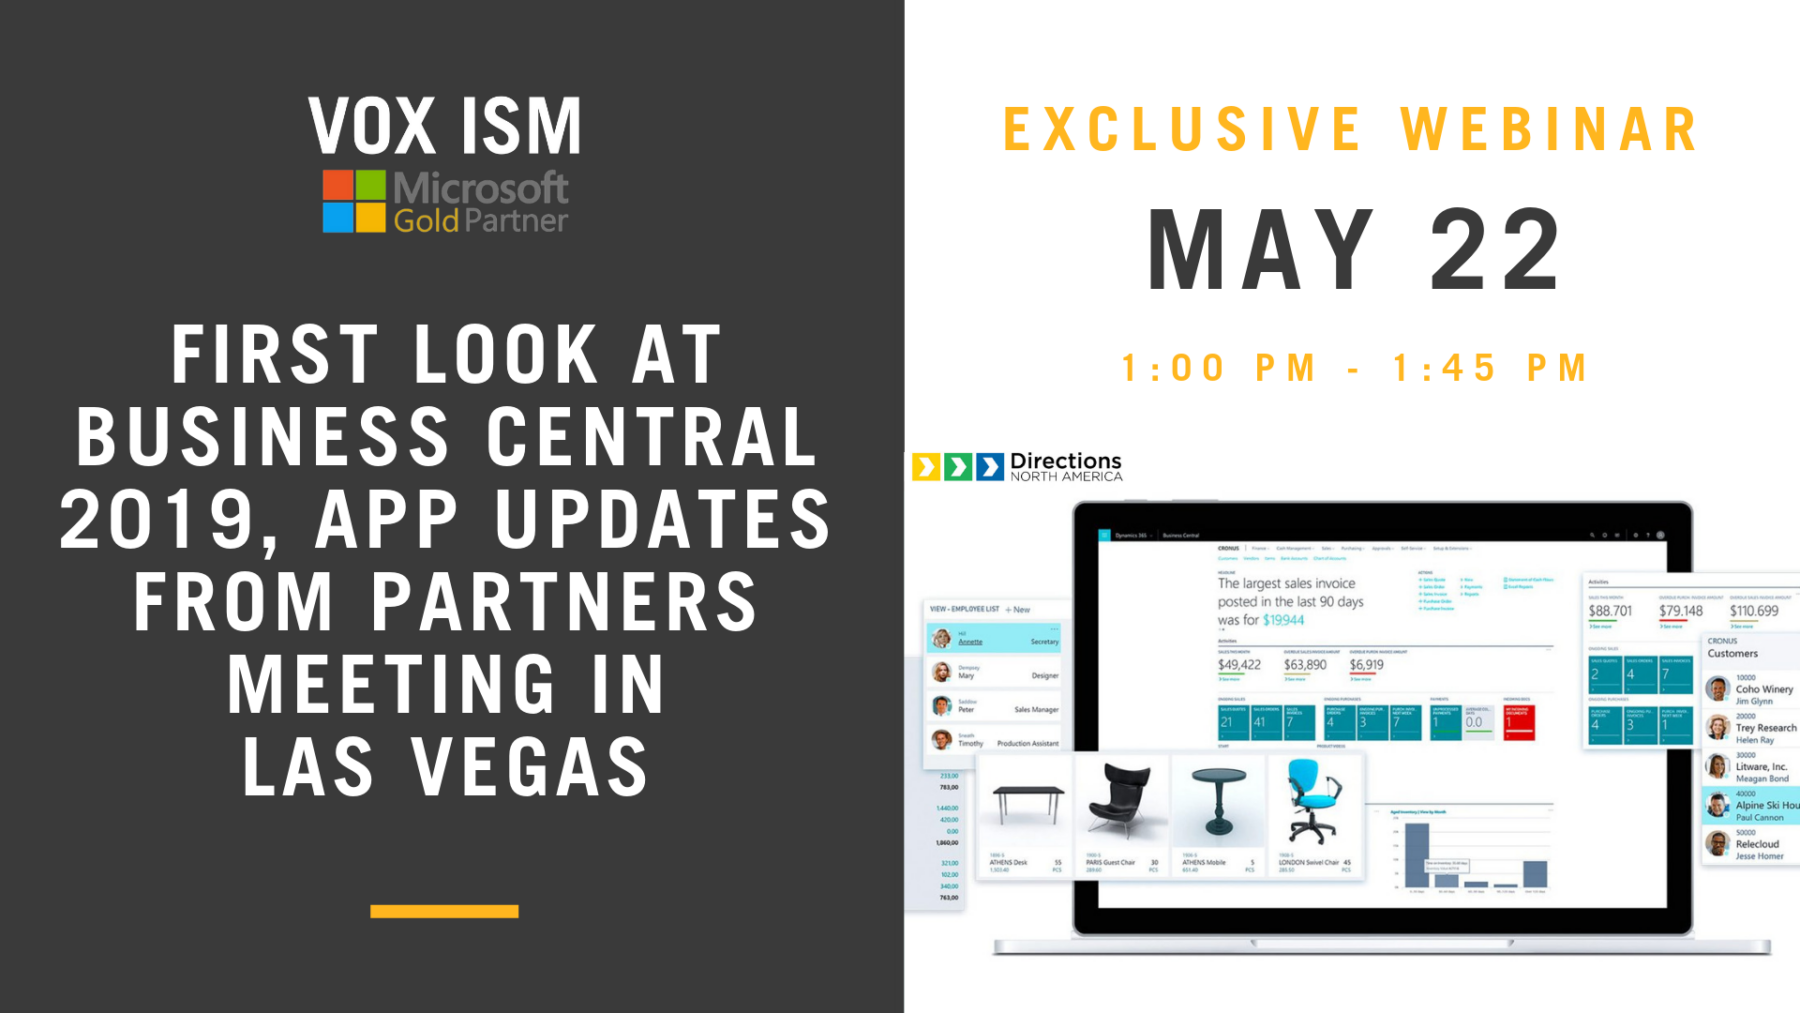 First Look at Business Central 2019, APP updates from Partners Meeting in Las Vegas – May 22 – Webinar